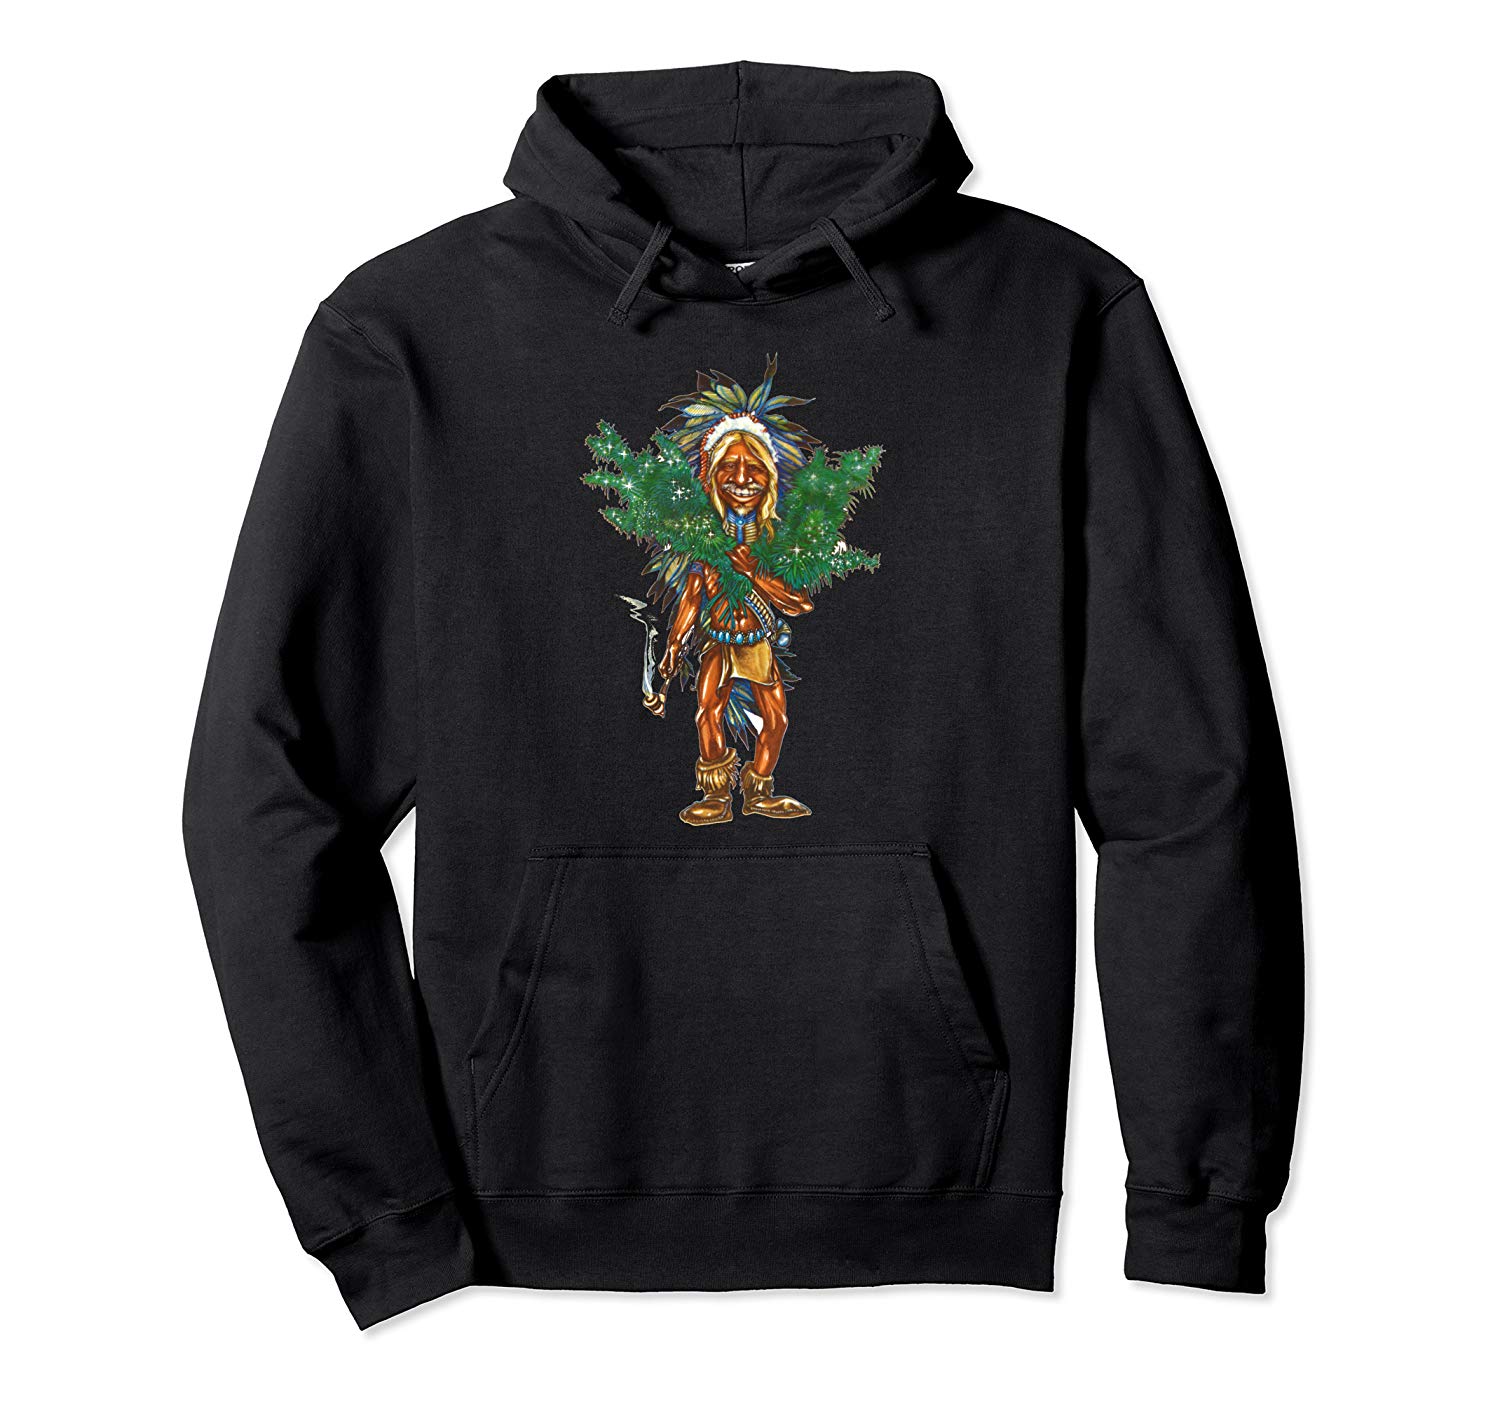 An image of a black cannabis grower hoodie from Ganja Outpost.